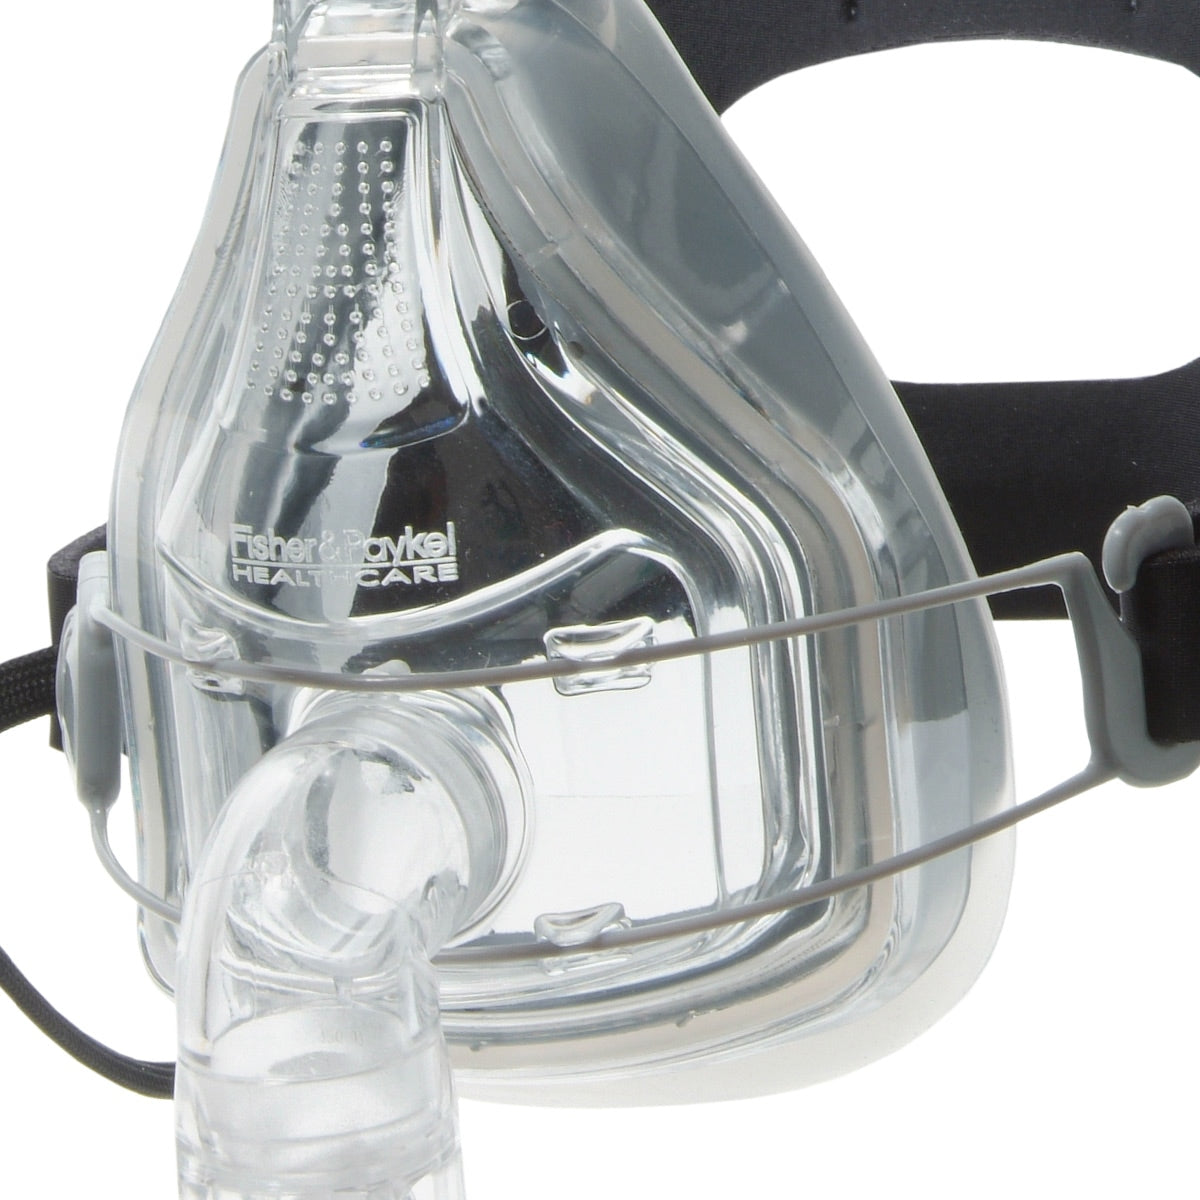 Fisher and Paykel FlexiFit 431 Full Face CPAP Mask with Headgear